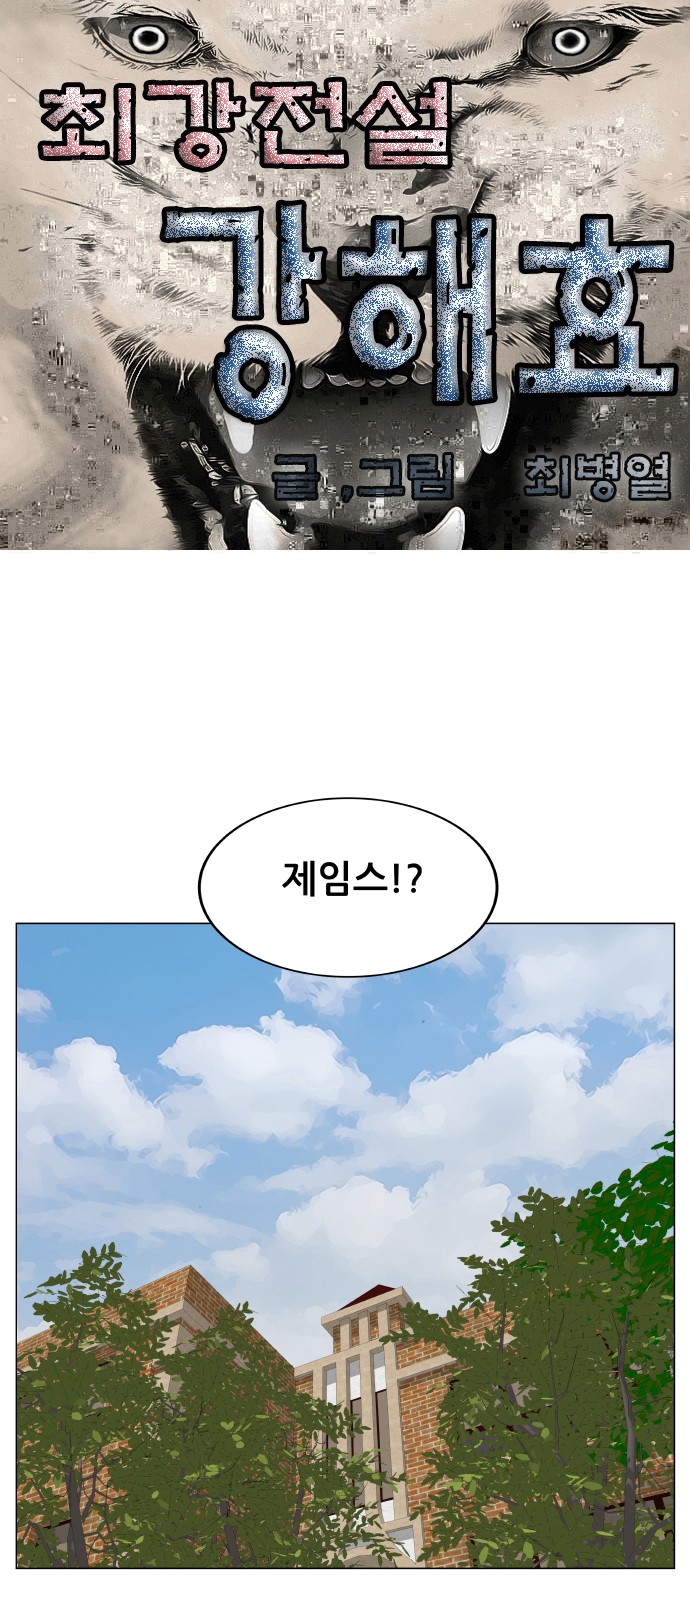 Ultimate Legend - Kang Hae Hyo - Chapter 477 - Page 1